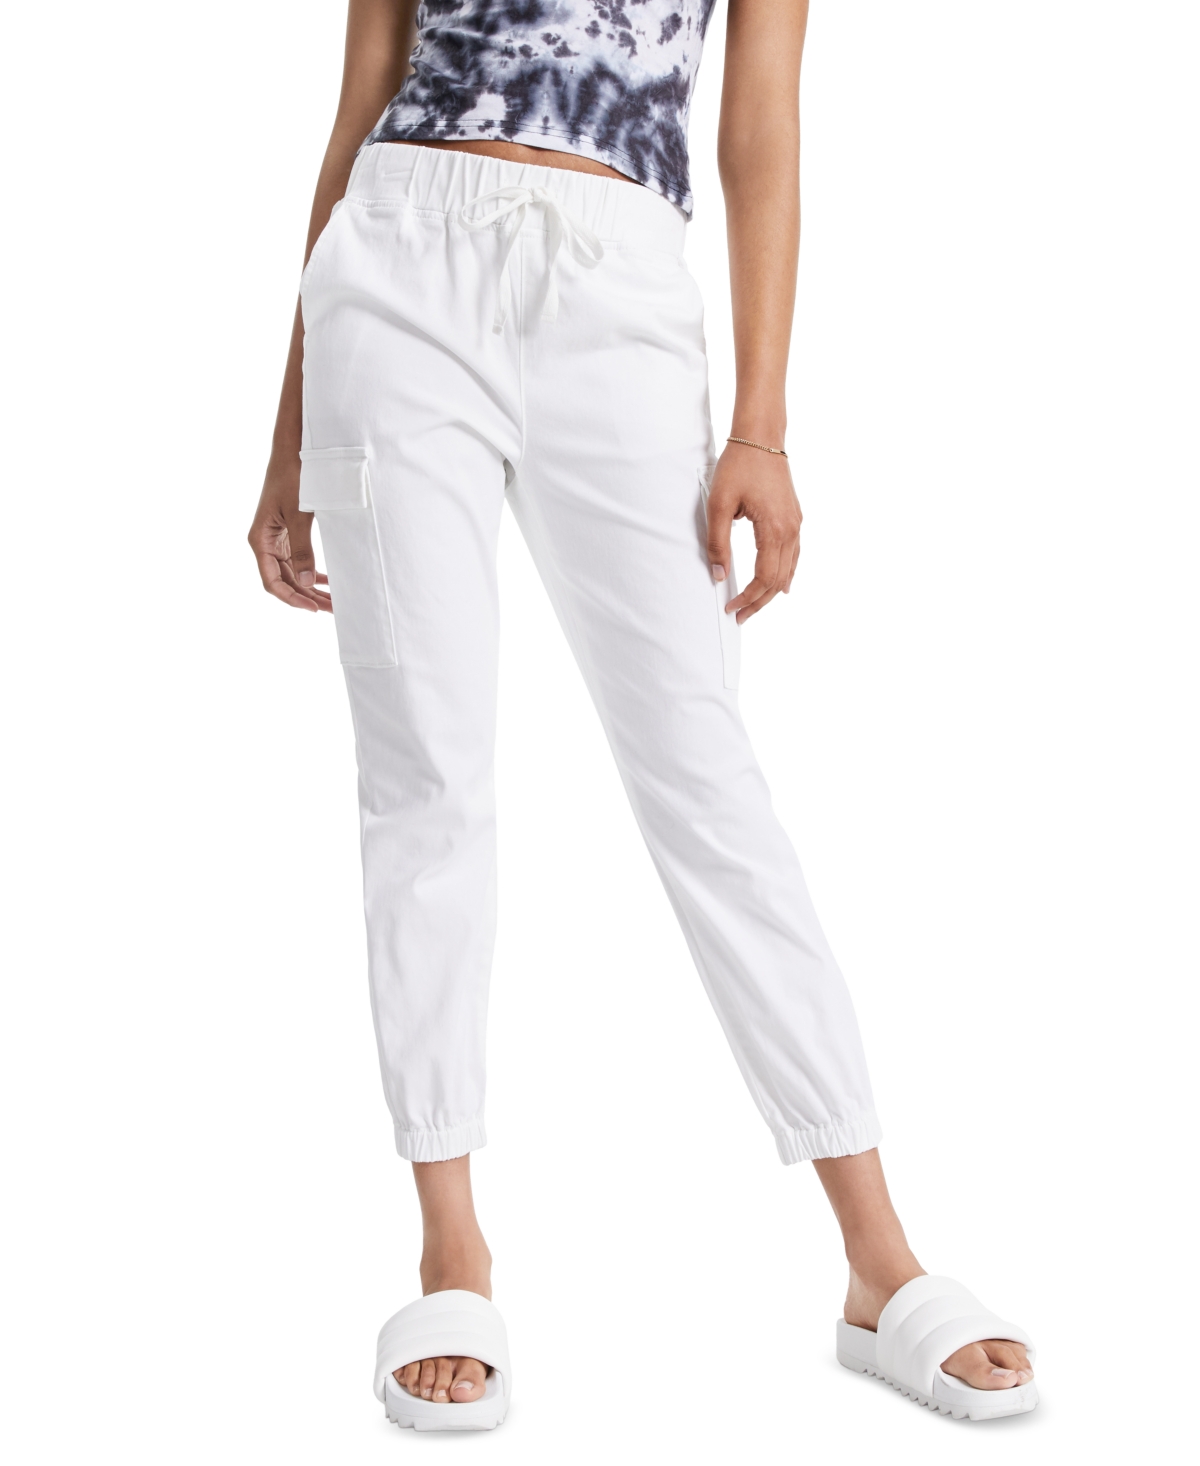 Juniors' High Waisted Pull On Utility Jogger Pants - Buff Nude